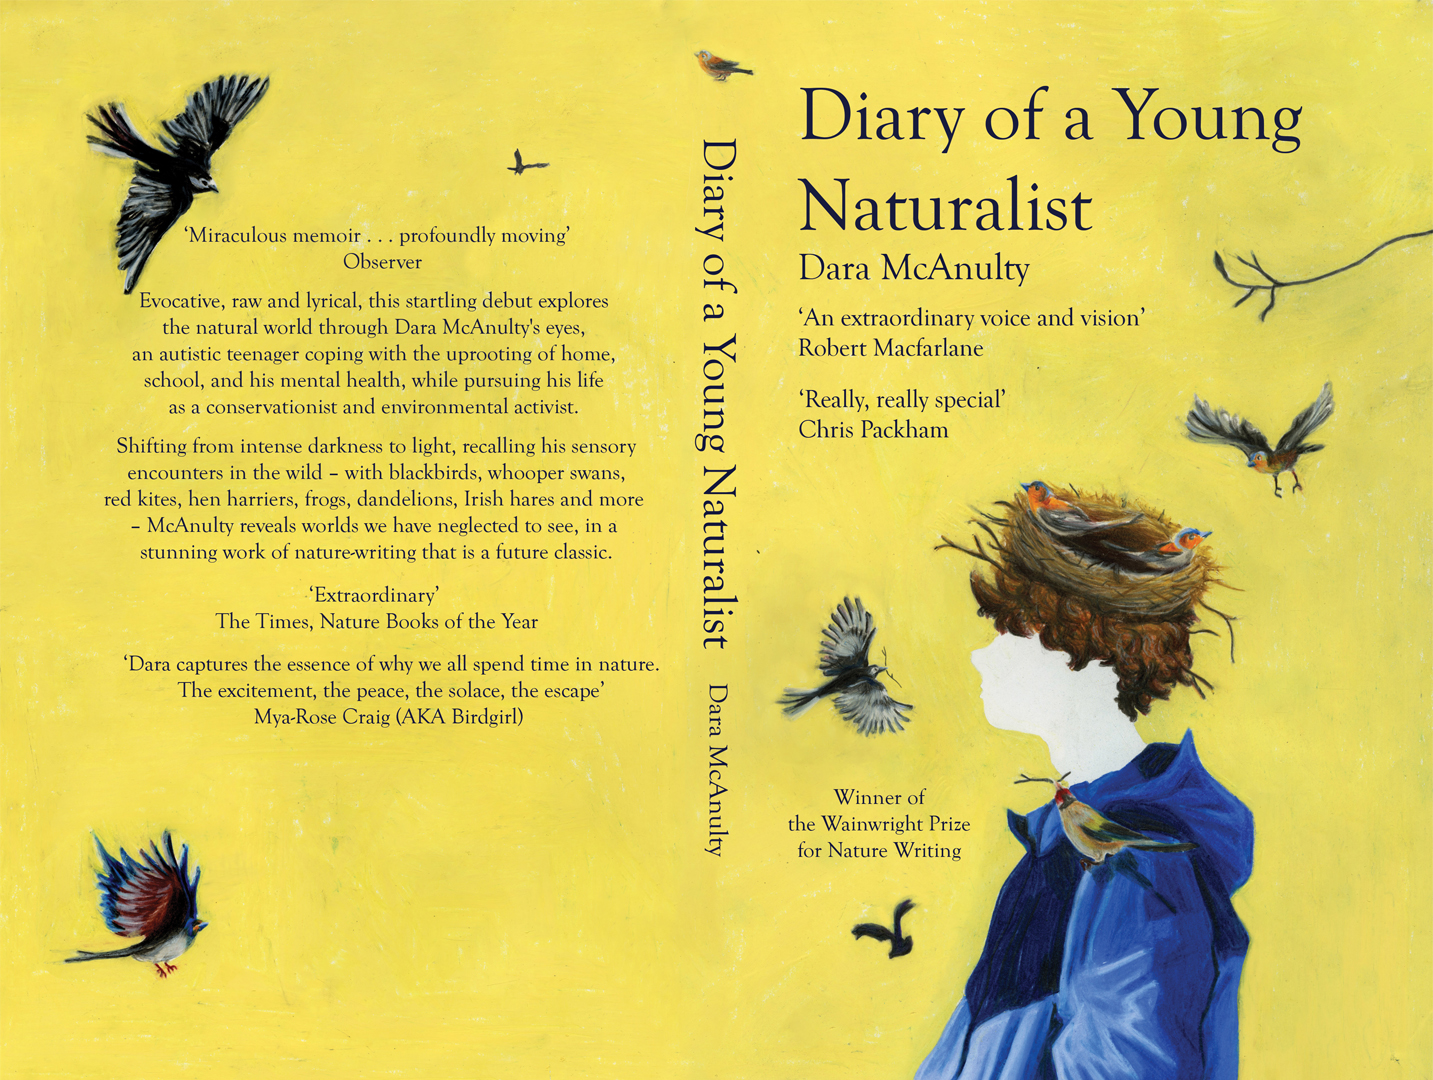 “Diary of a Young Naturalist”. Full book cover for “Diary of a Young Naturalist” by Dara McAnulty, documenting a year as a nature enthusiast. Alternative illustrations are on my website.